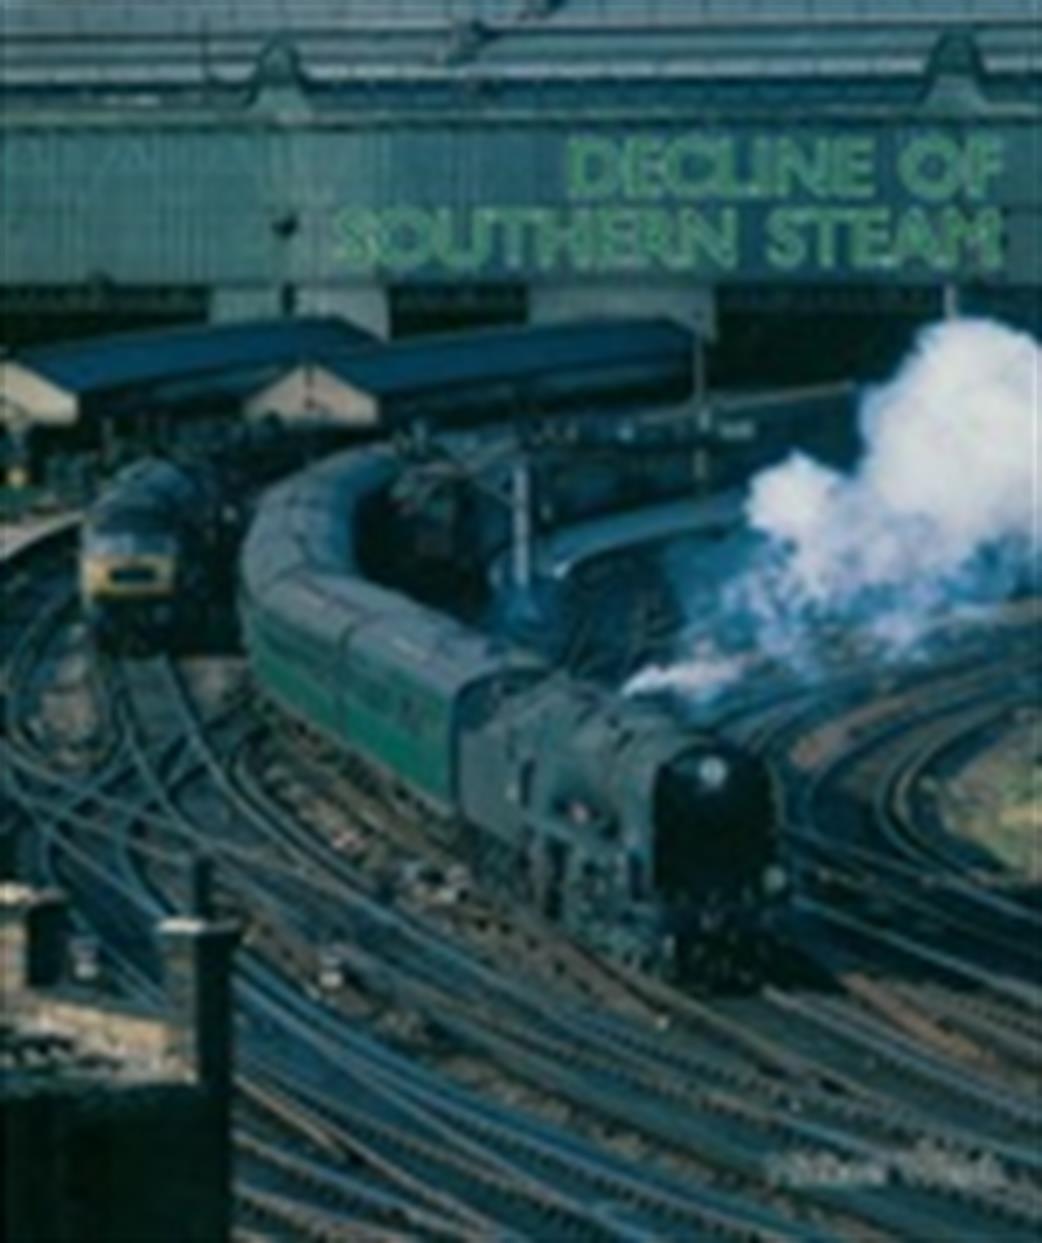 Capital Transport Publishing  9781854143136 Decline of Southern Steam by Michael Welch